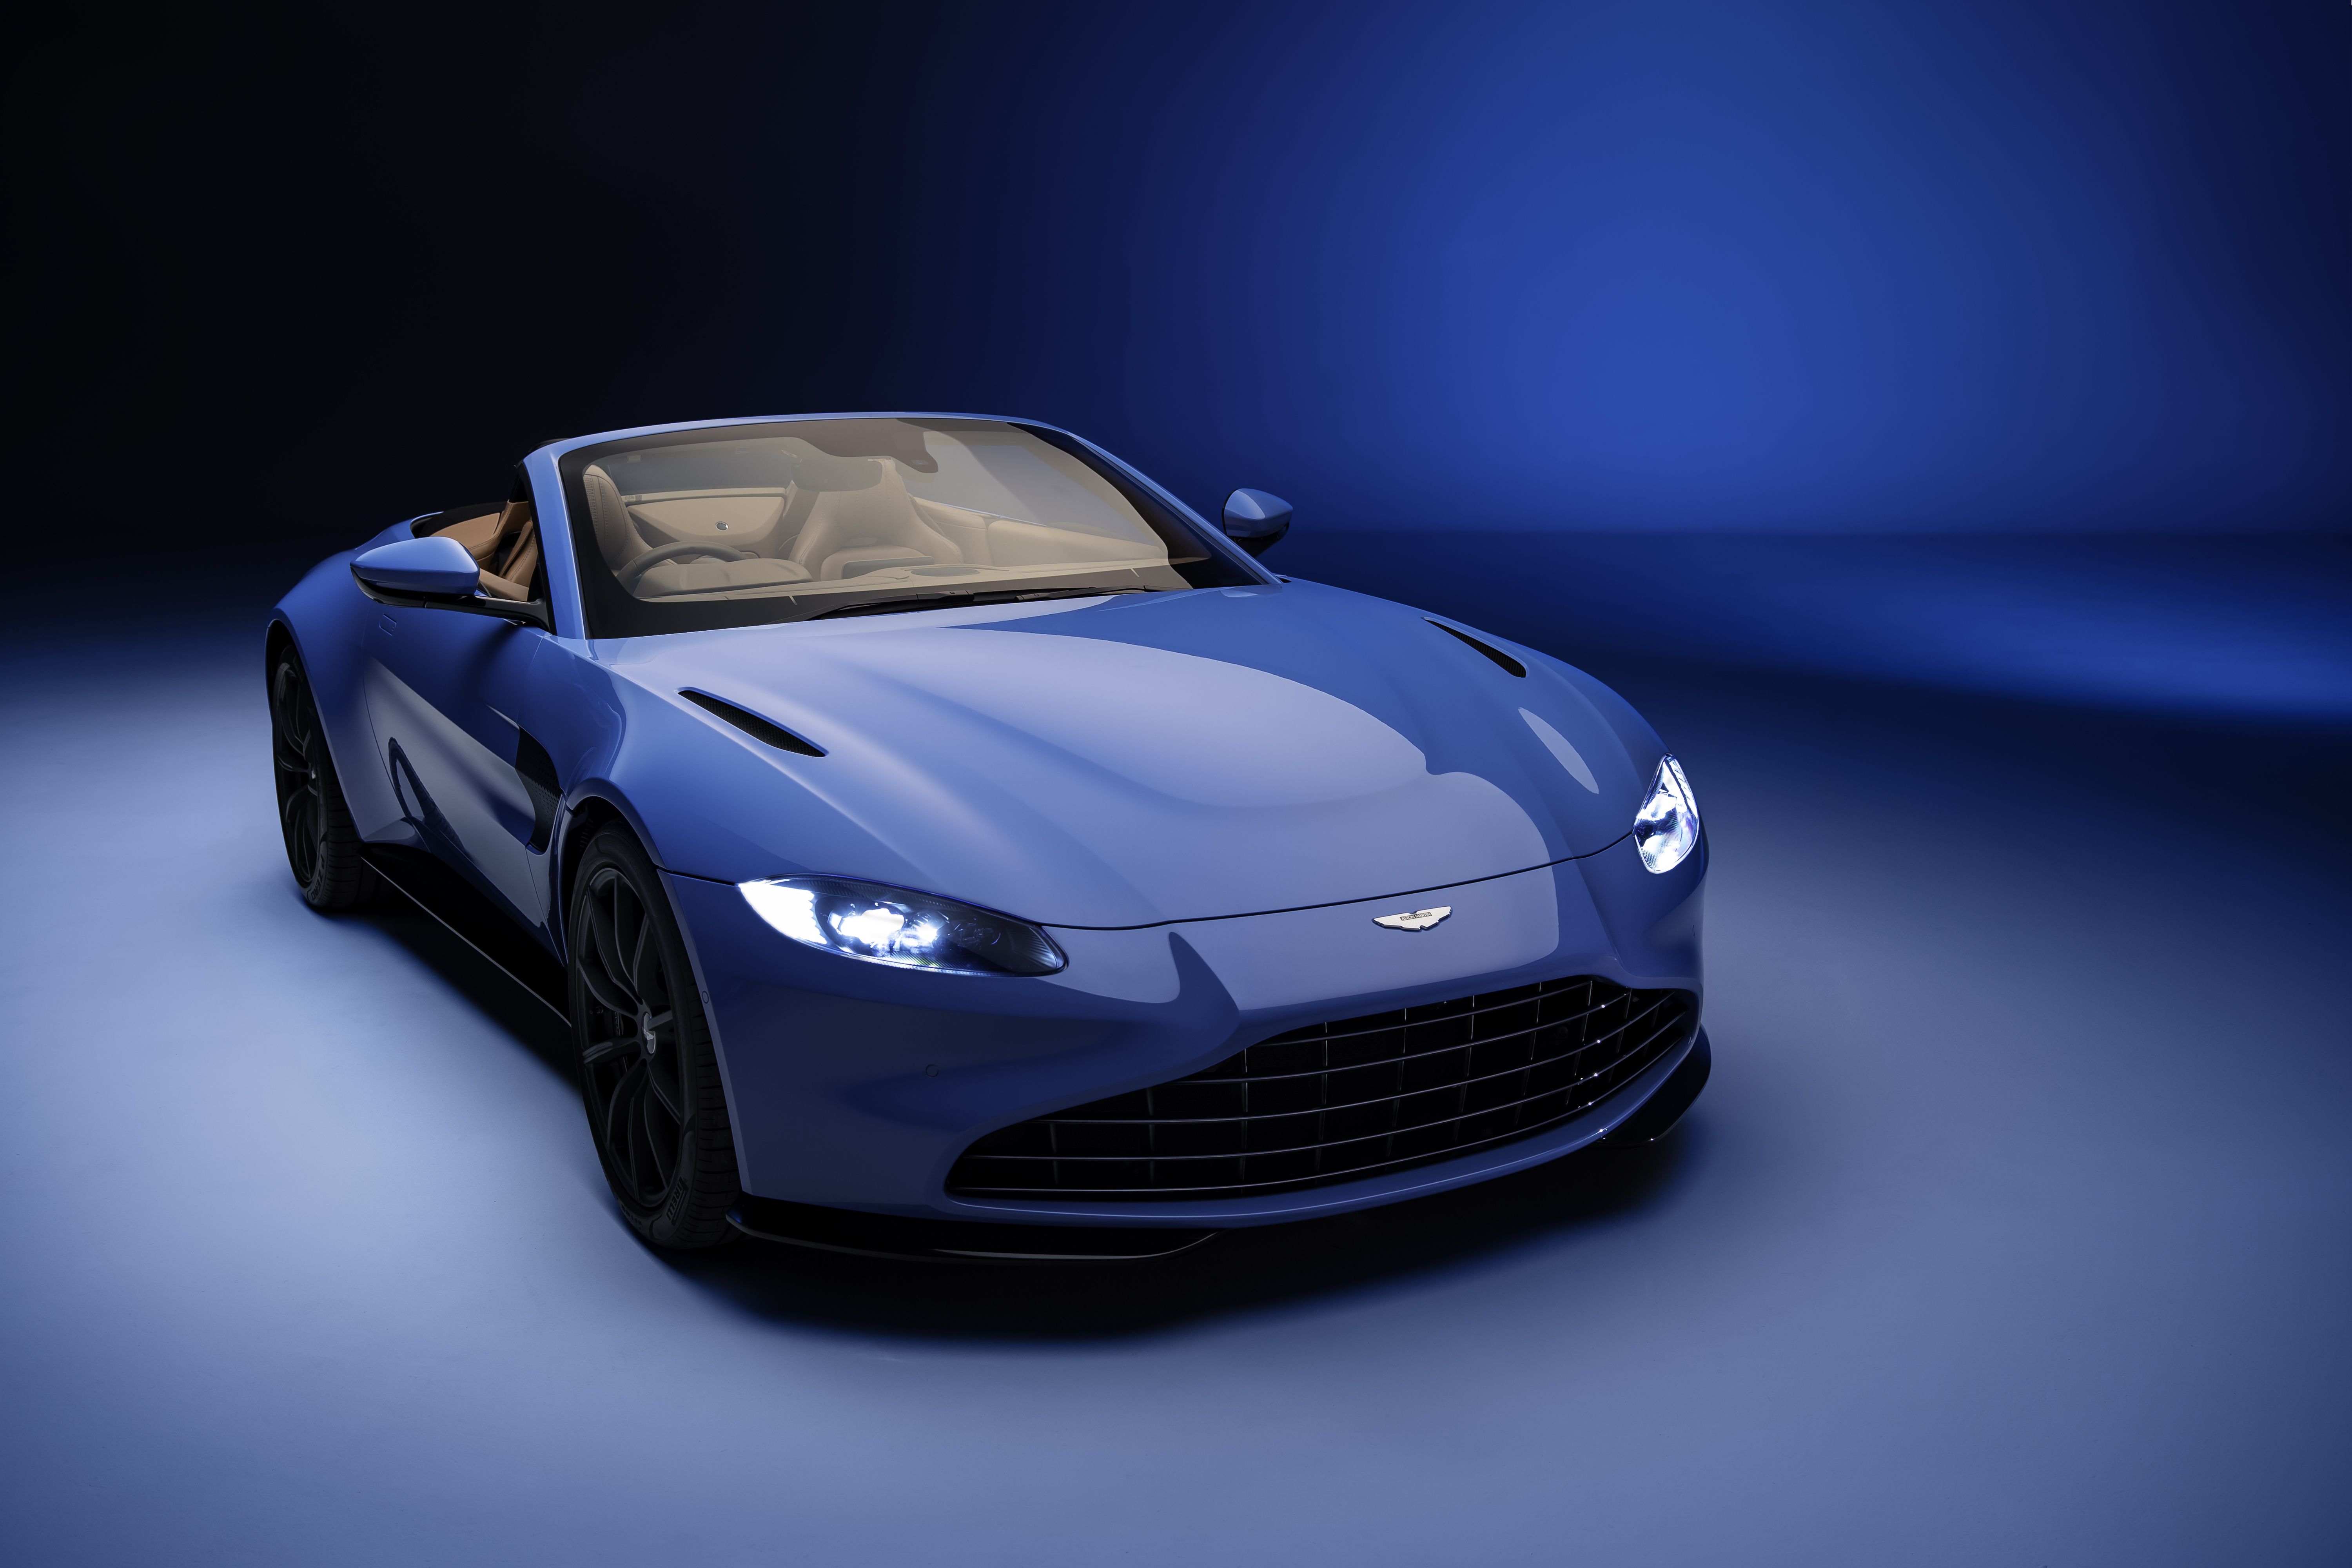 The front of a blue Vantage Roadster